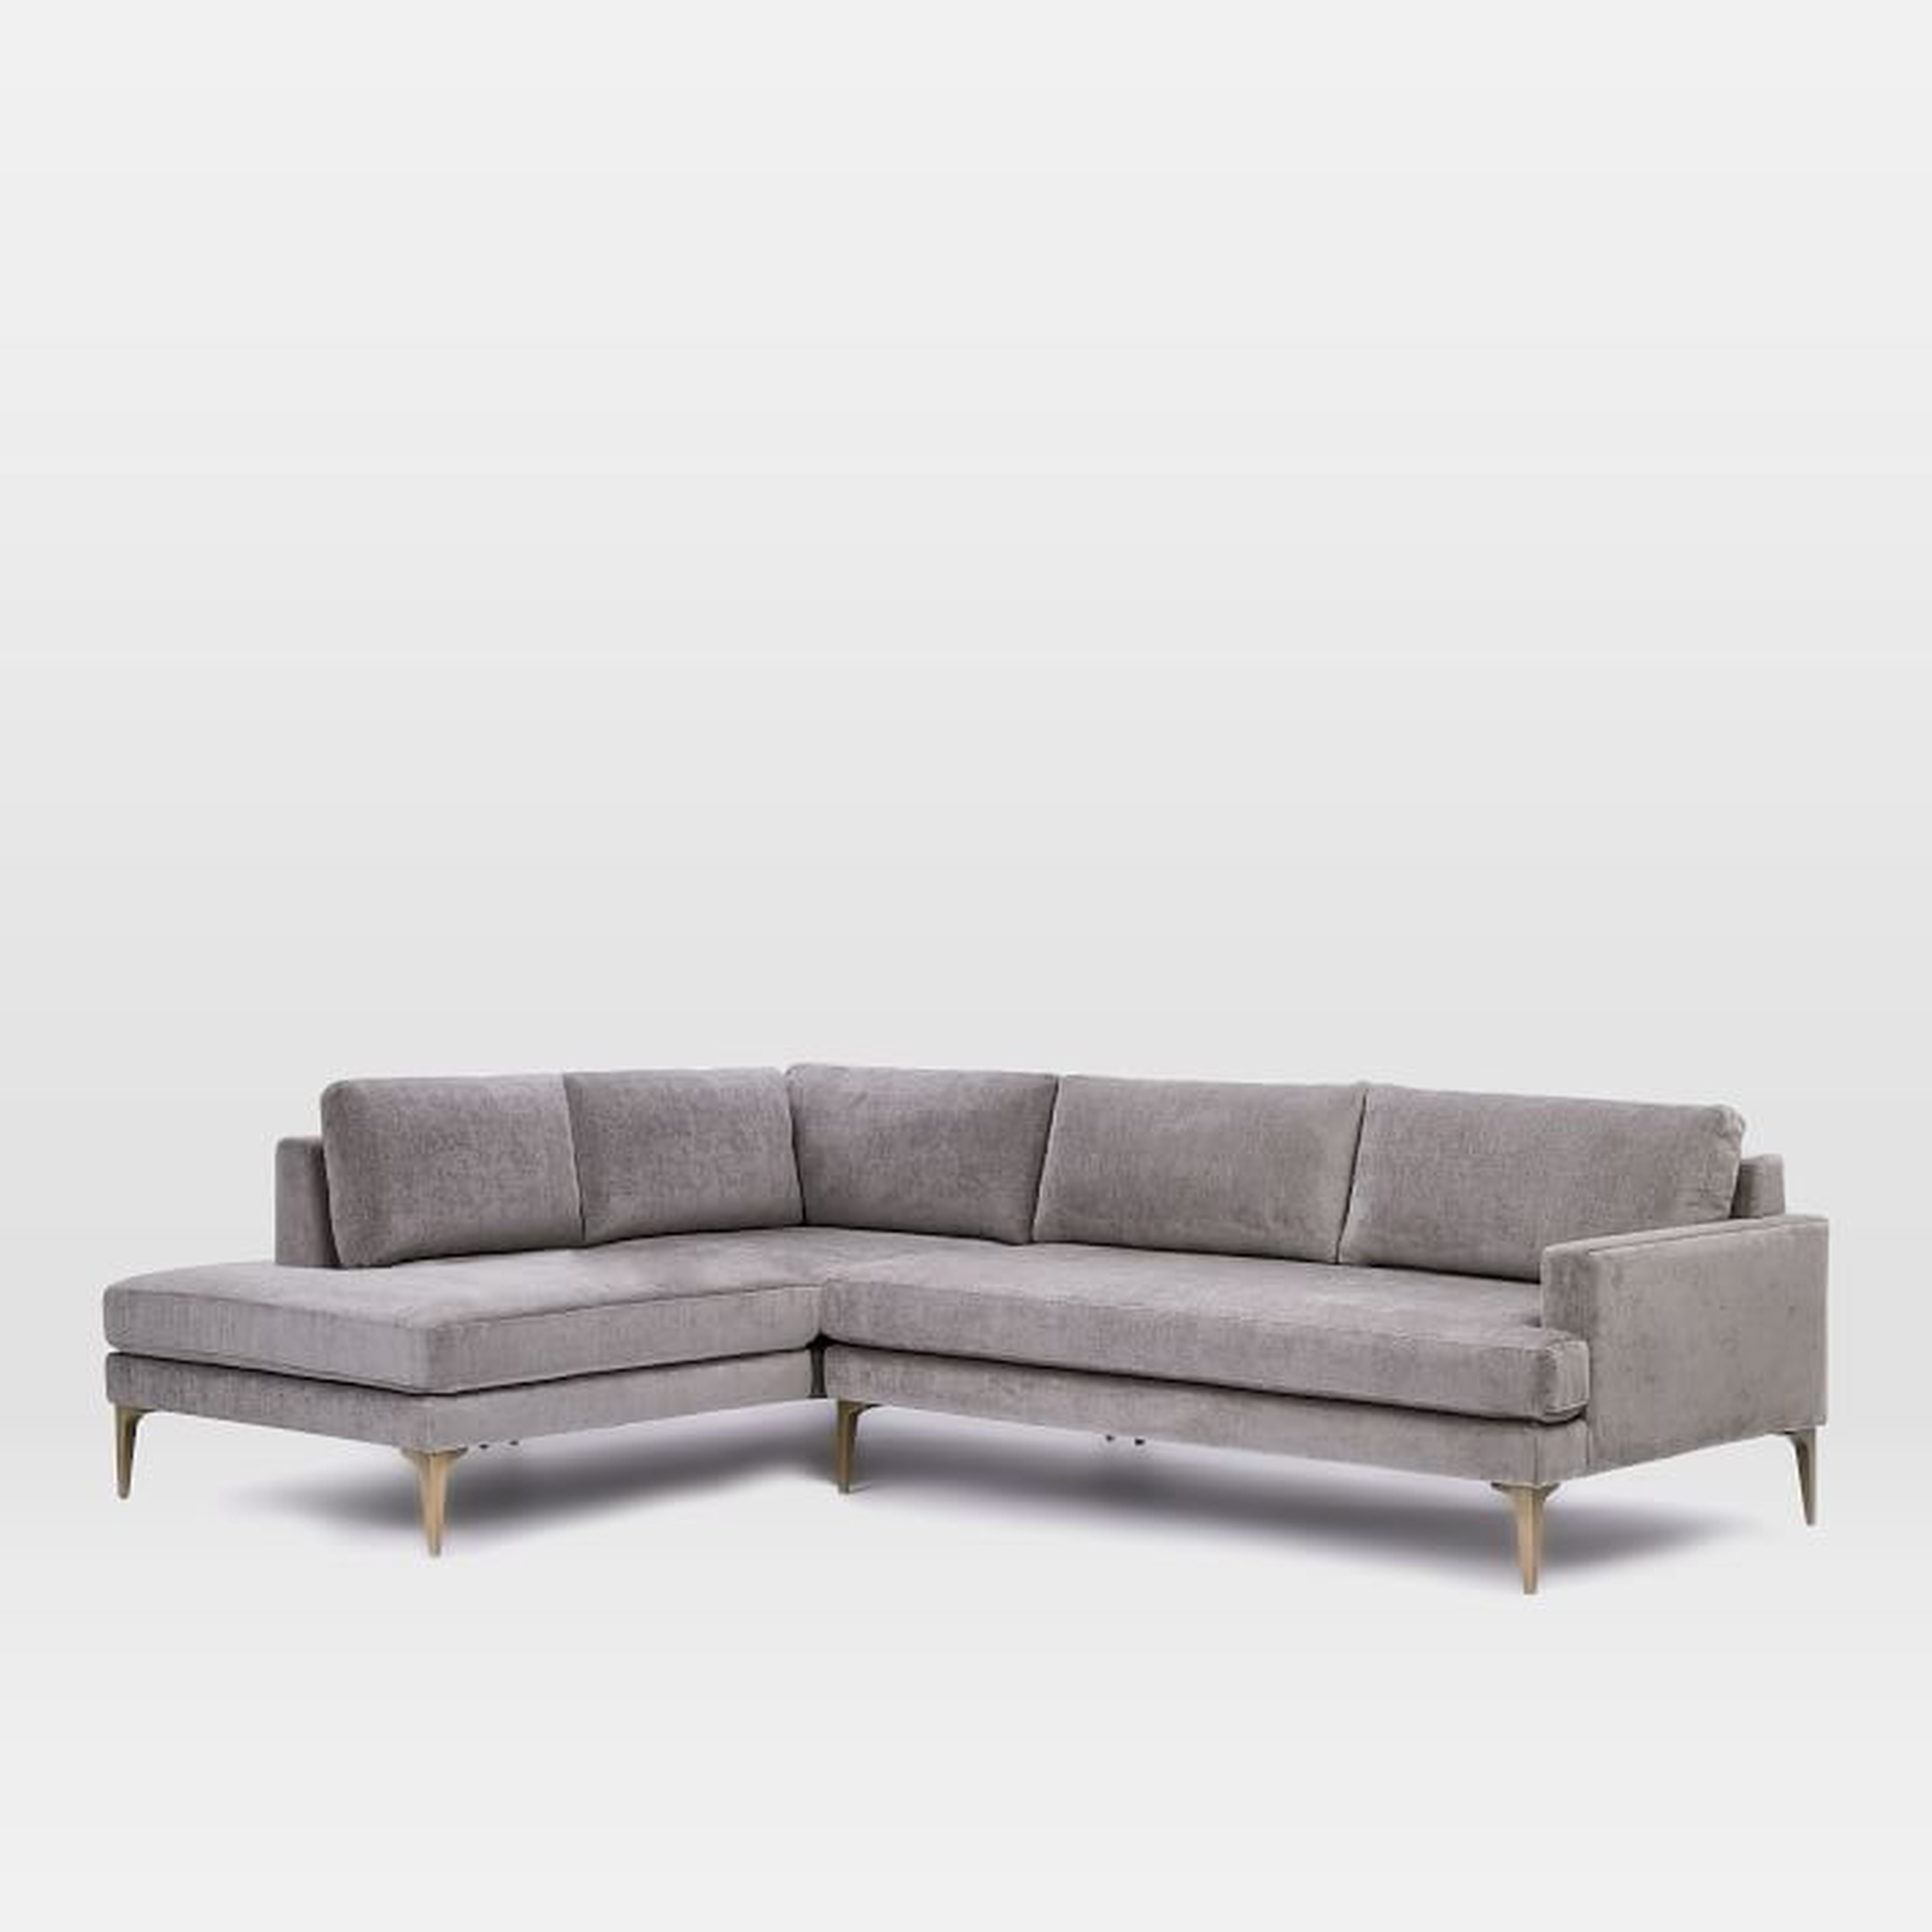 Andes Terminal Chaise Sectional - Metal, Worn Velvet - Large (96.5" w) Right Arm - West Elm